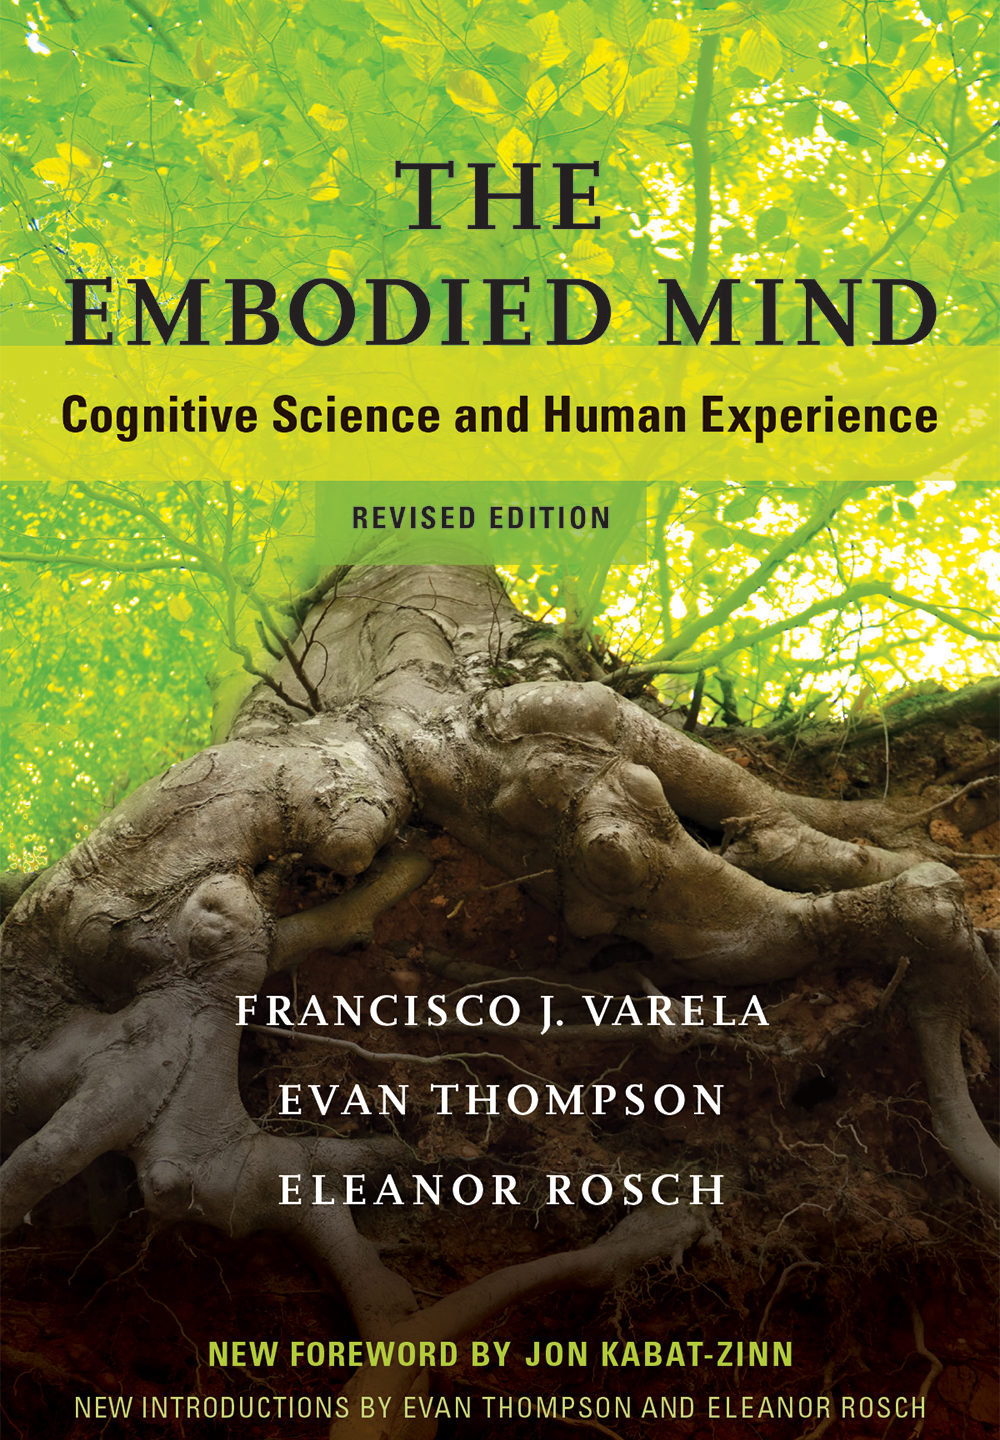 The Embodied Mind: An Introduction